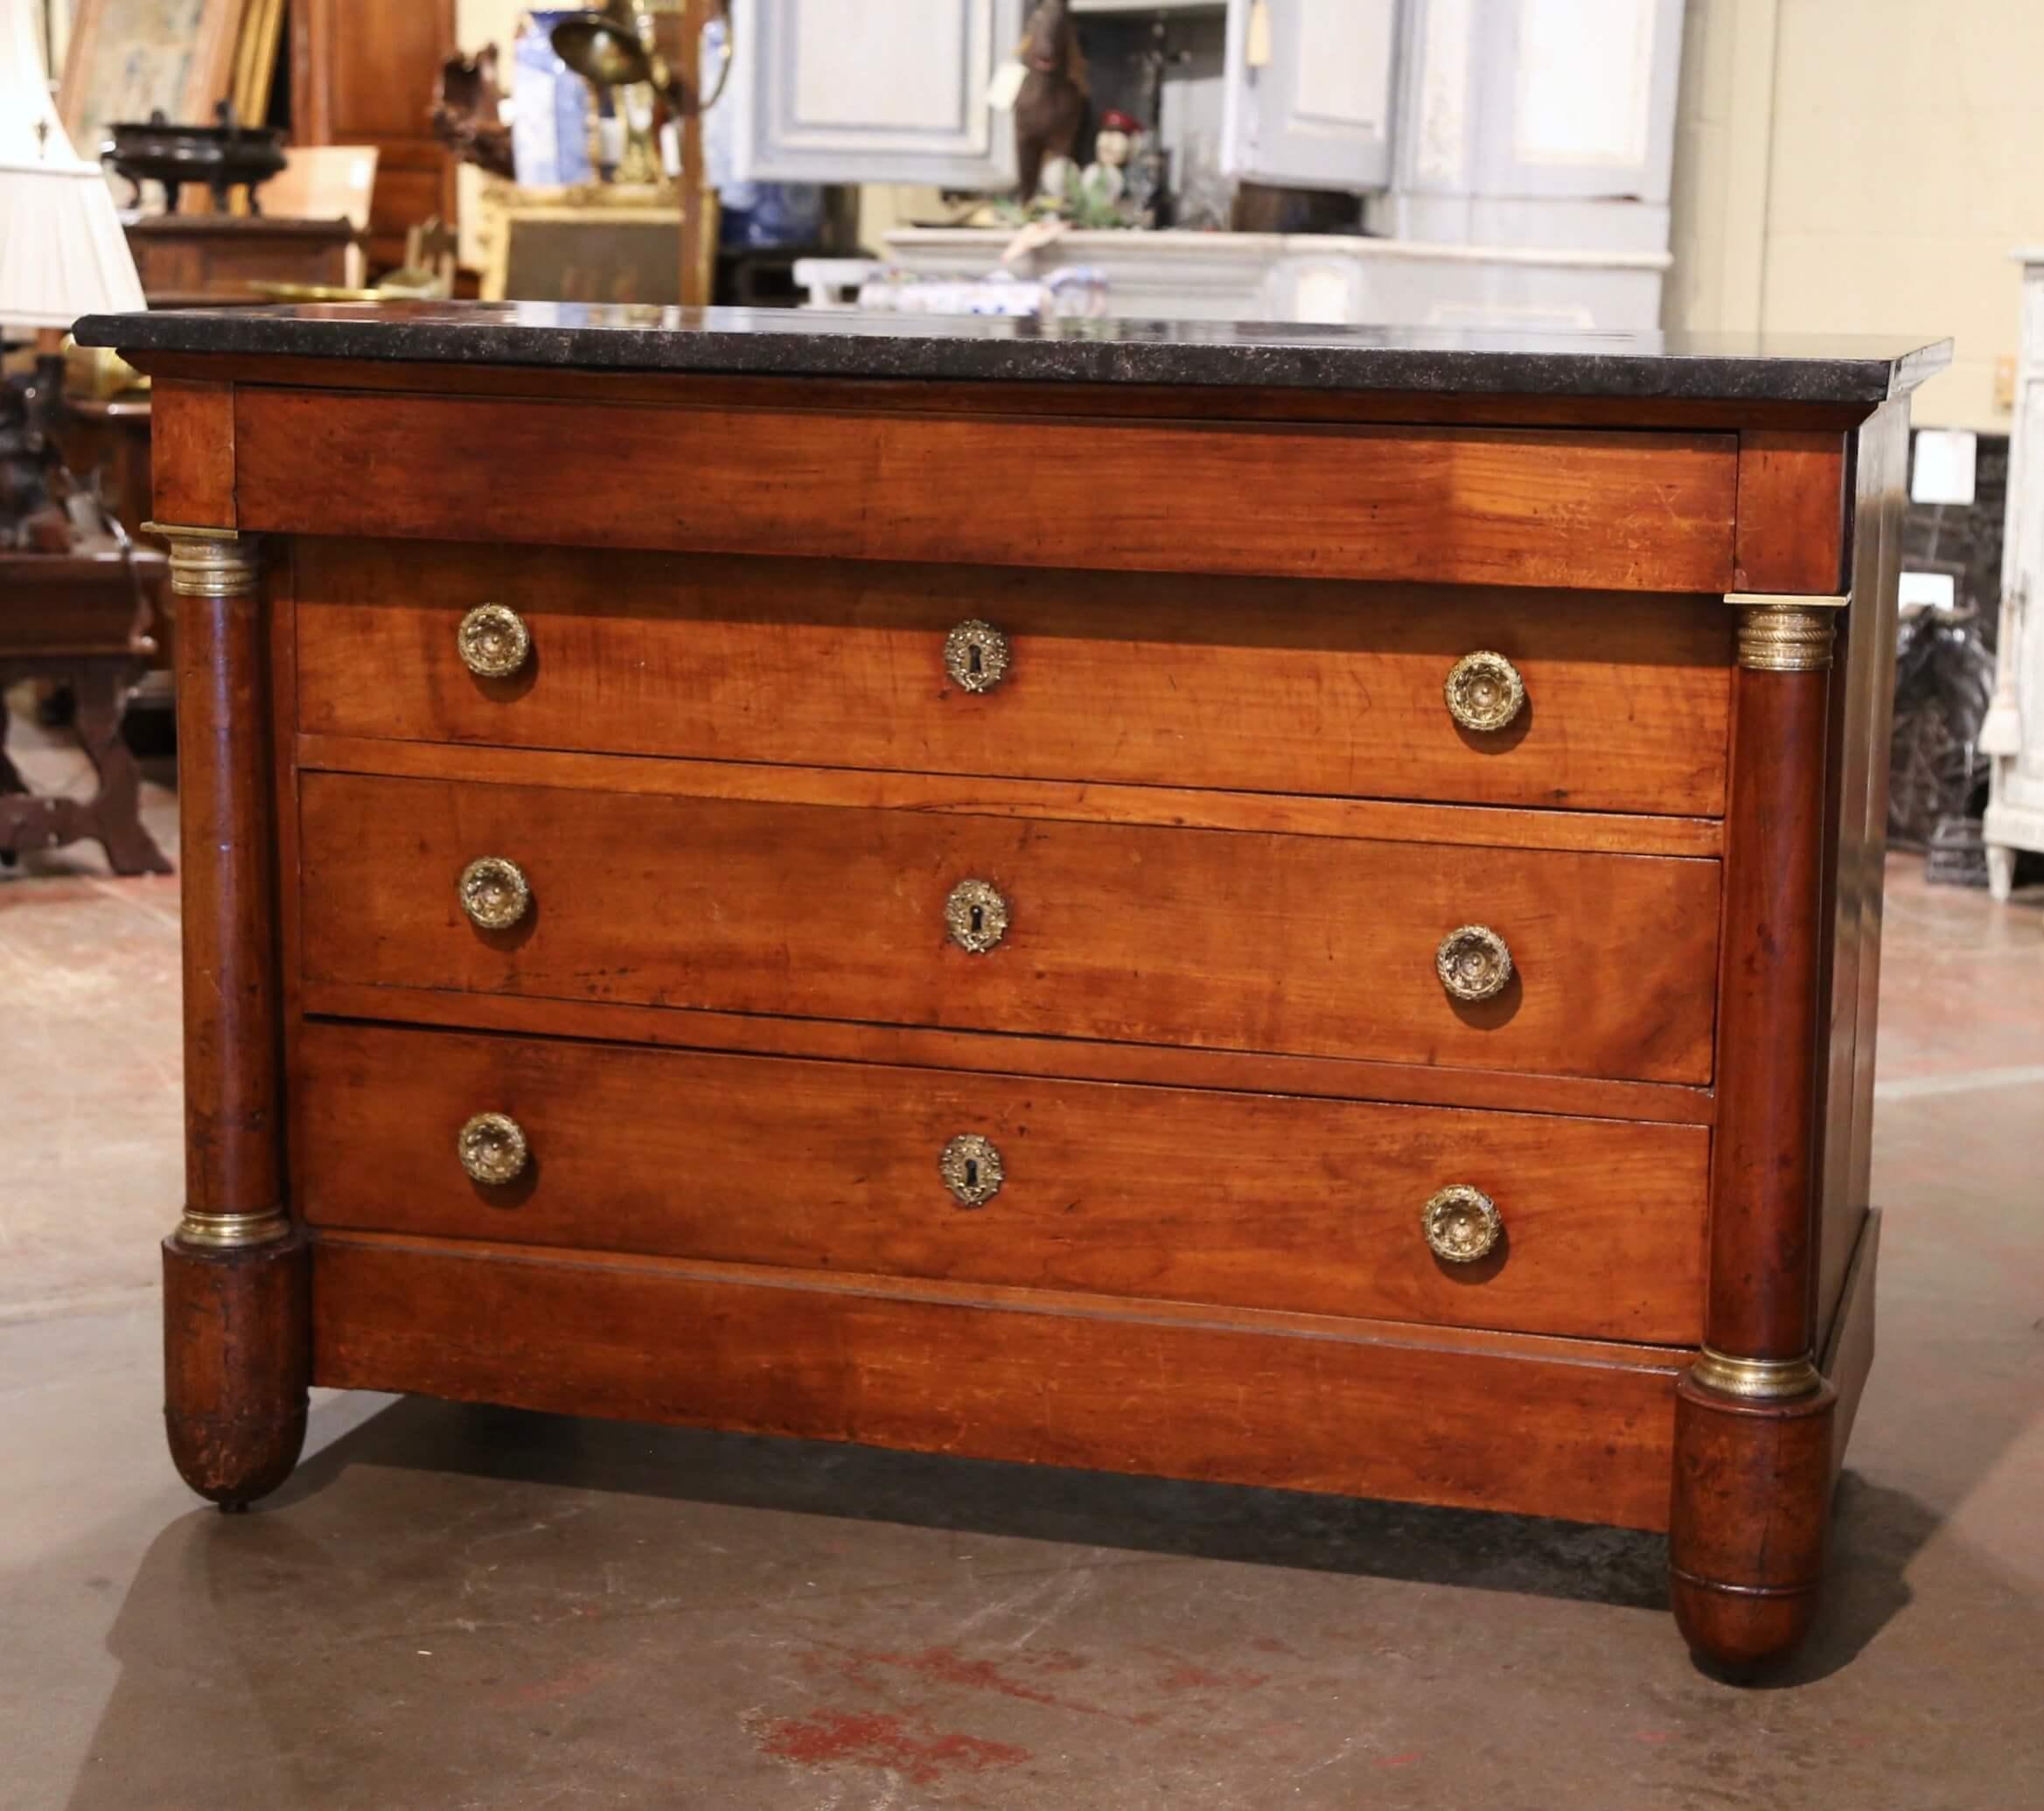 19th Century French Empire Marble Top Carved Walnut Commode Chest of Drawers For Sale 1